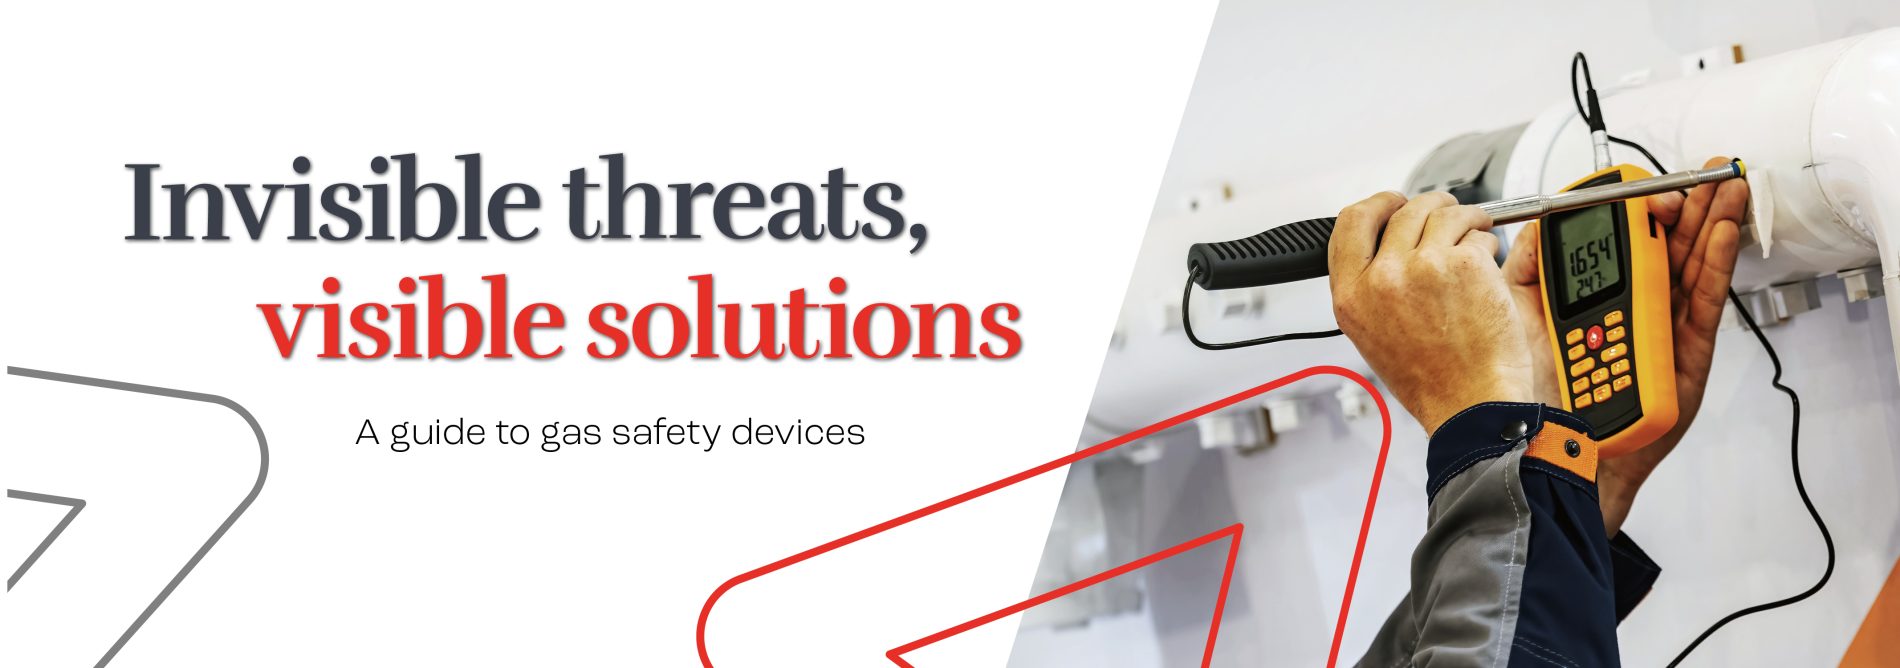 Invisible threats, visible solutions: A guide to gas safety devices Landon Kingsway